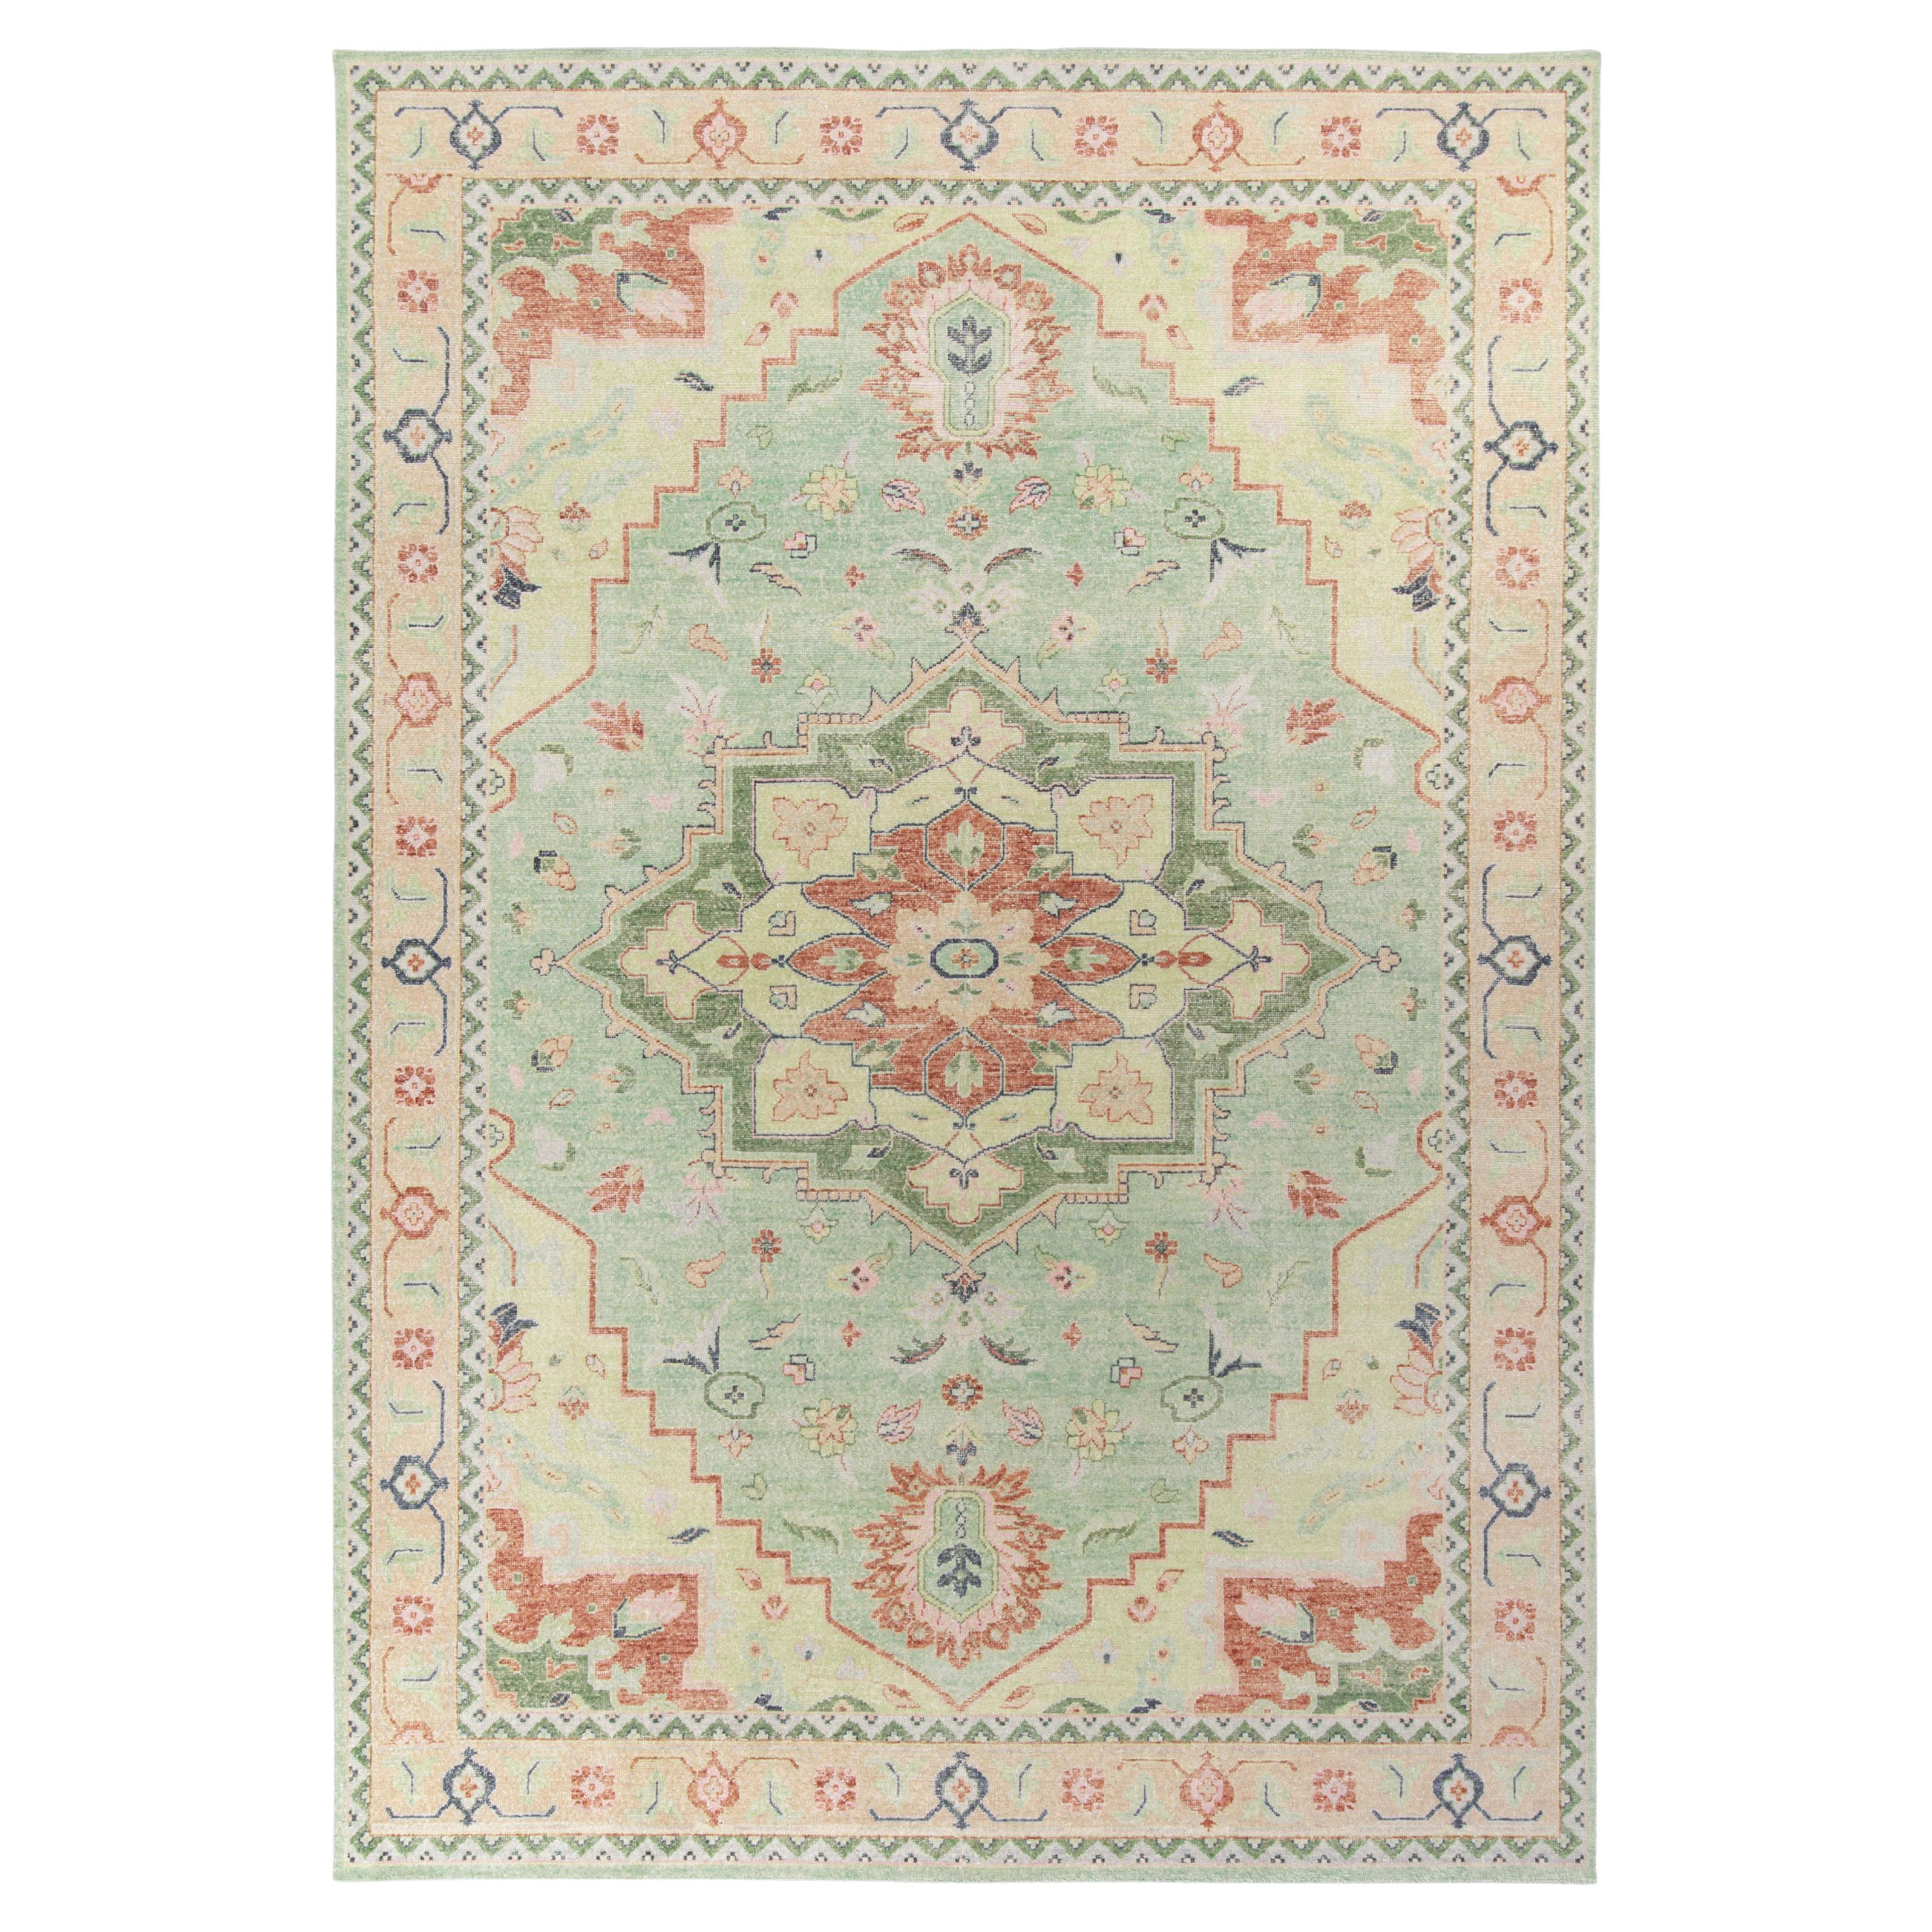 Rug & Kilim’s Distressed Serapi Style Rug in Green, Red Medallion Pattern